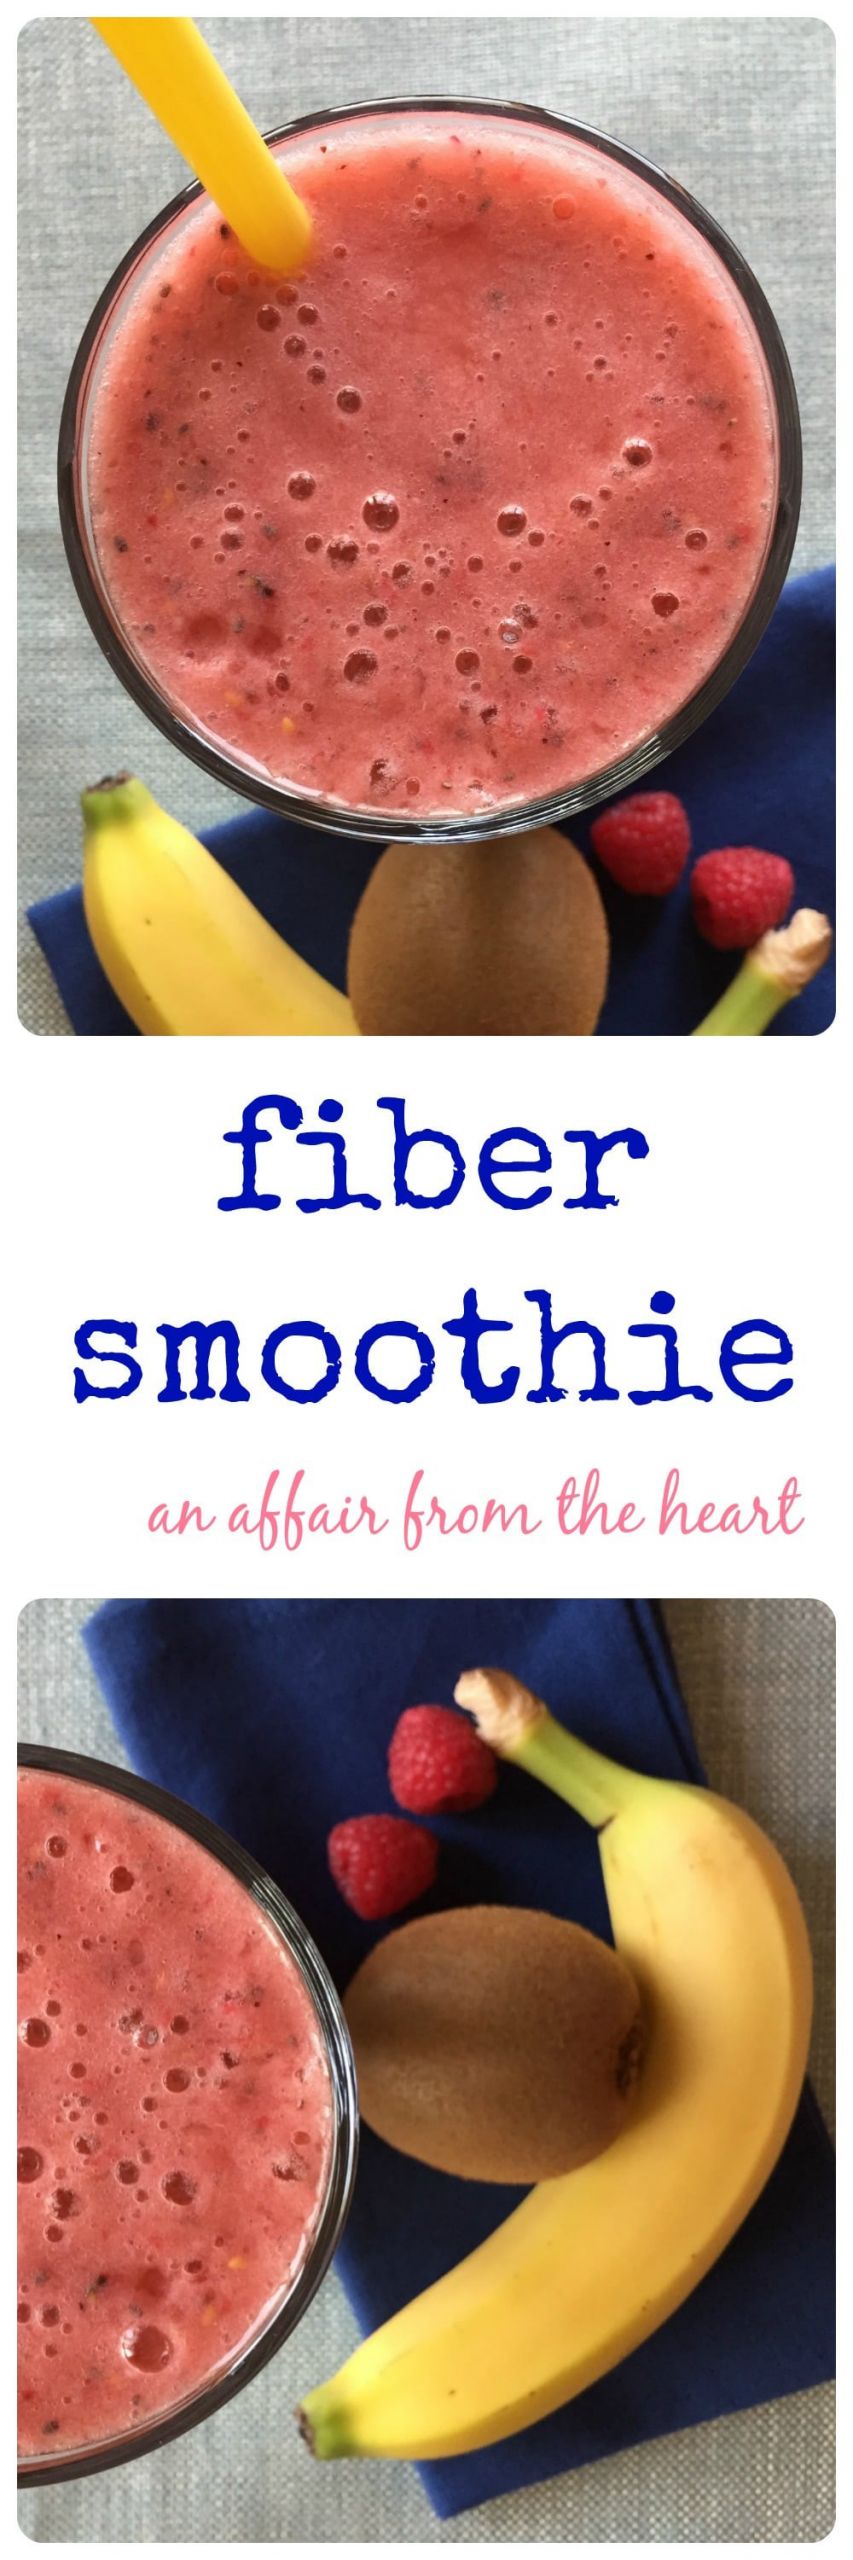 High Fiber Smoothies For Constipation
 24 Best Ideas High Fiber Smoothies for Constipation Best